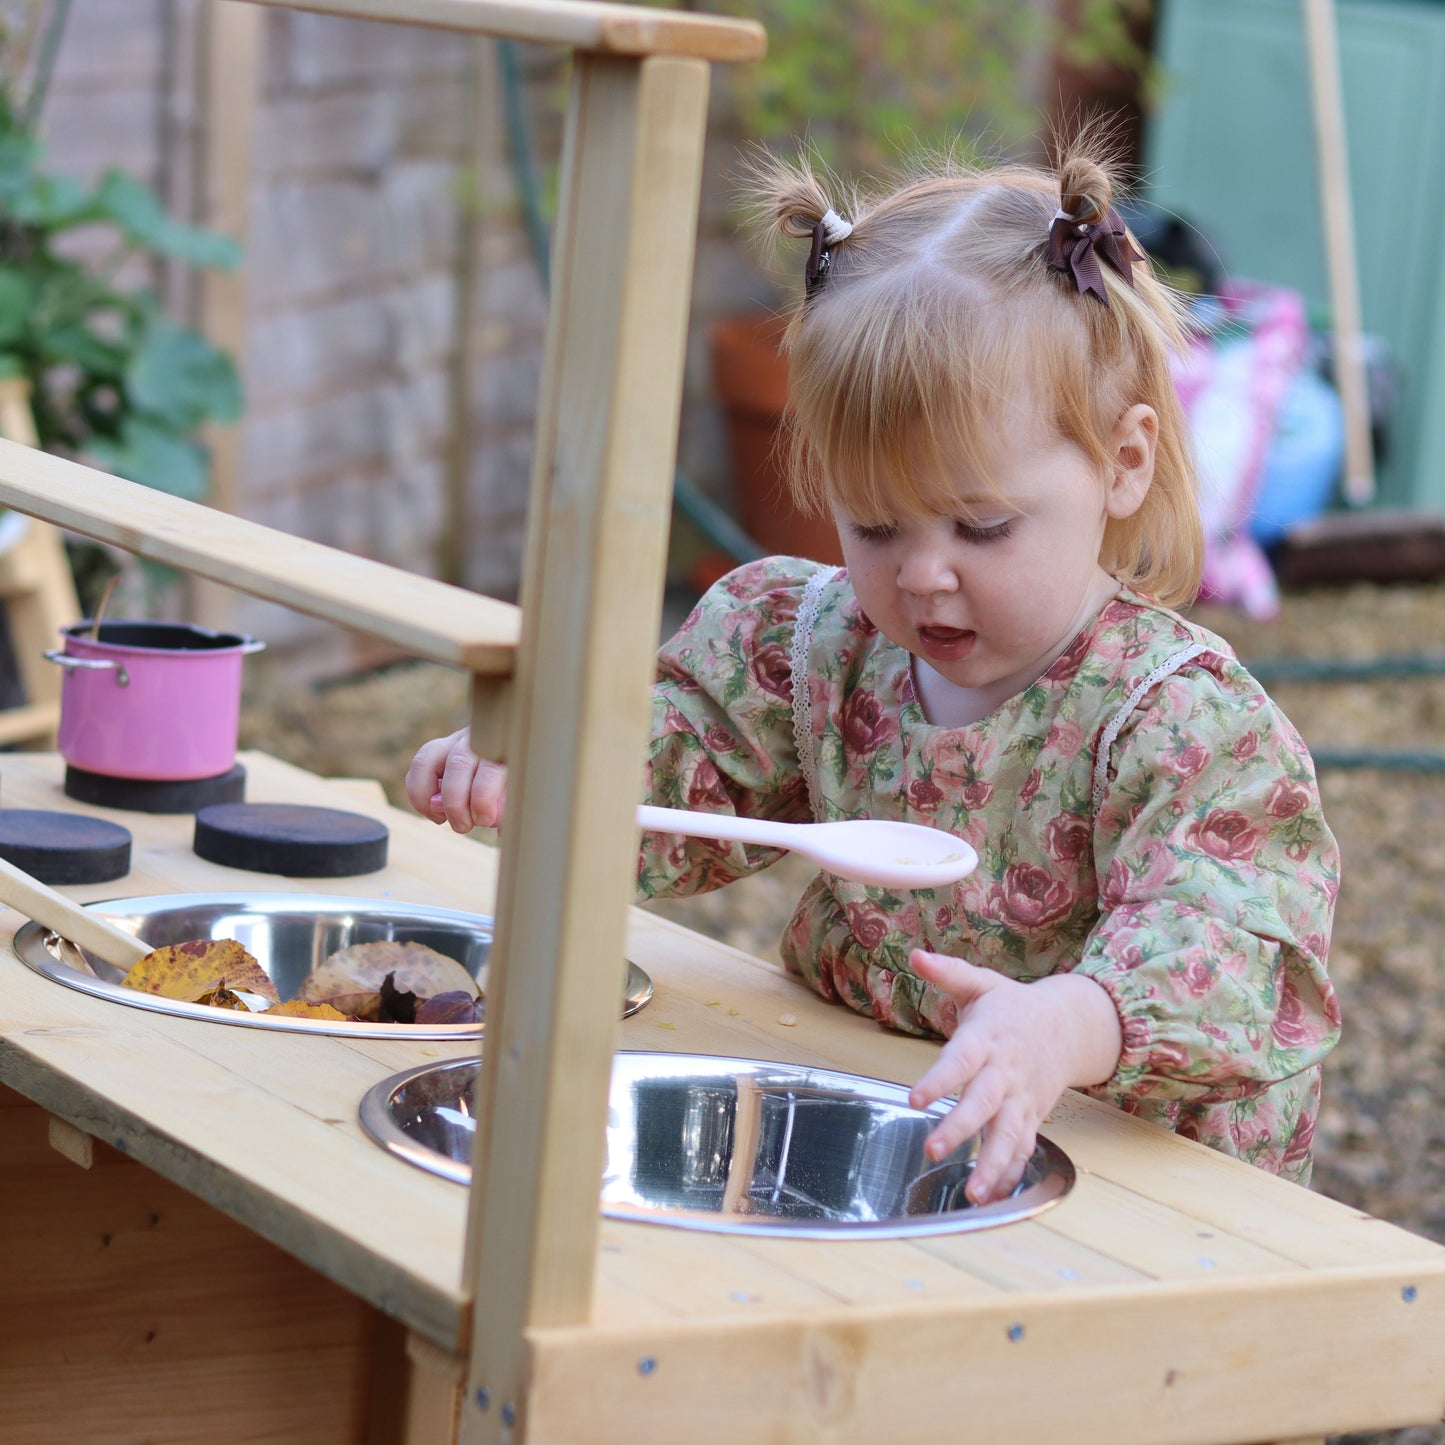 Mud Kitchen Extra: L-Shaped (Left Counter)